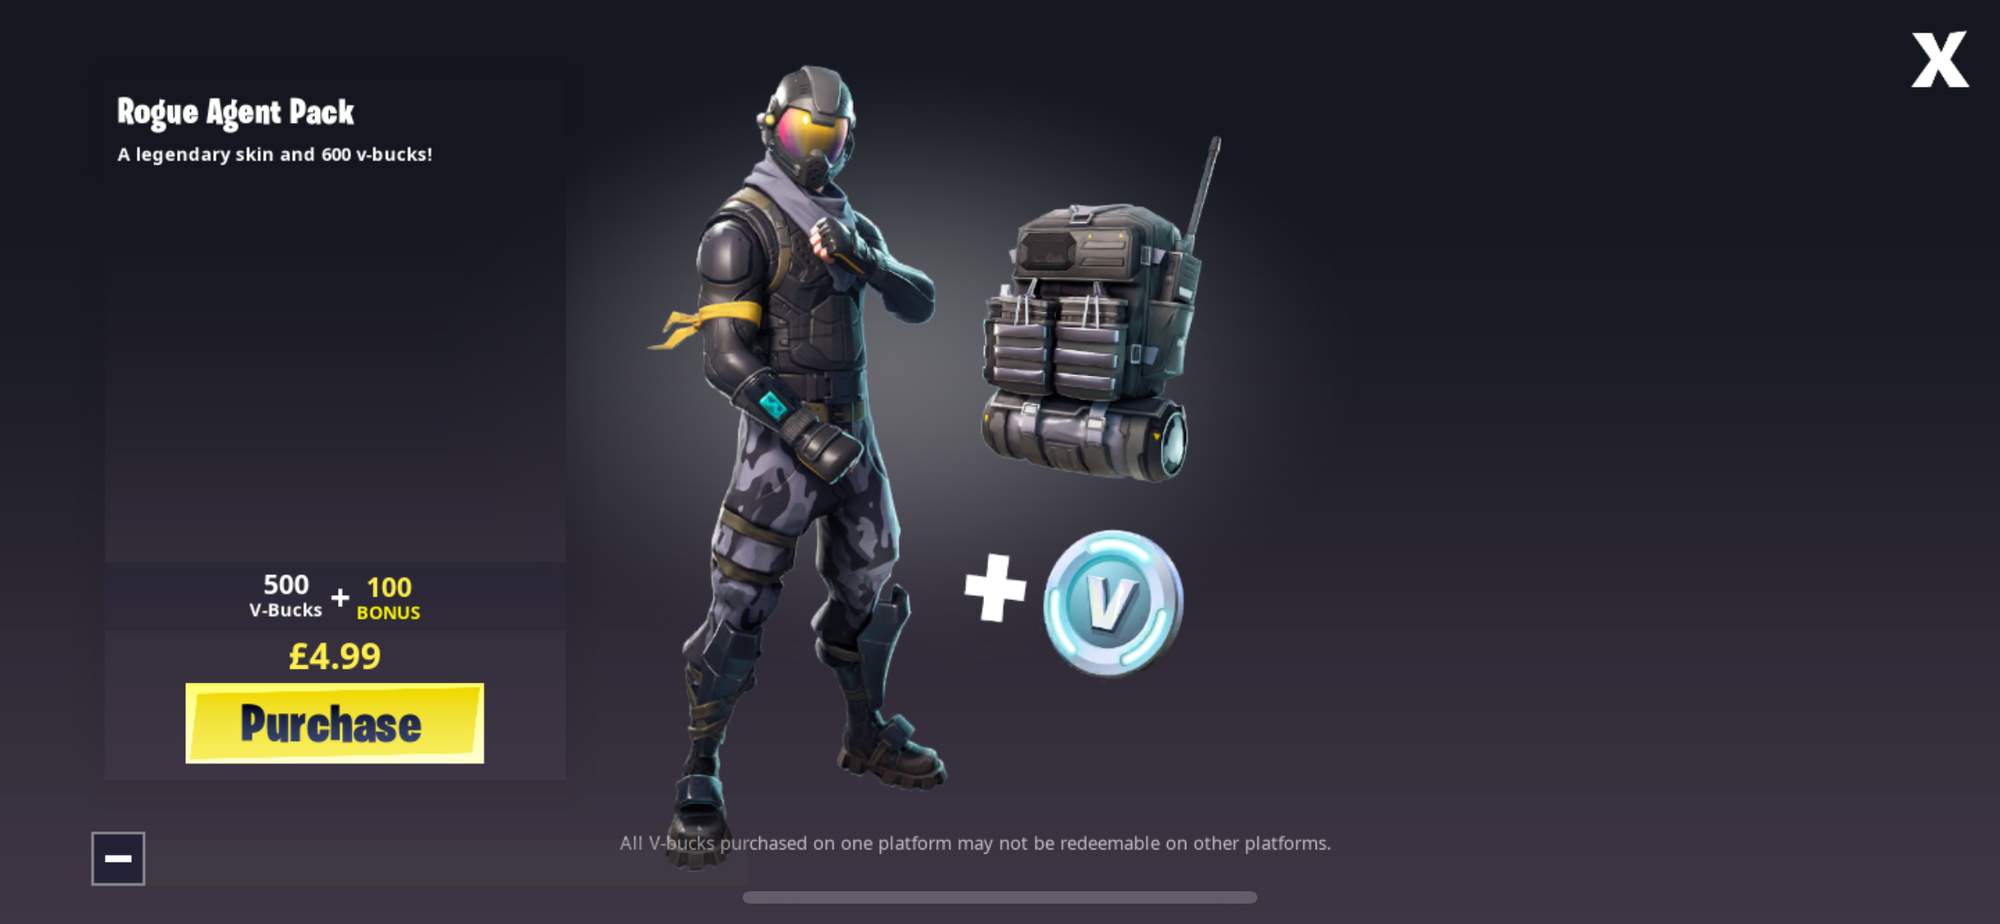 The Rogue Agent starter pack is available on the App Store ... - 2000 x 924 png 891kB